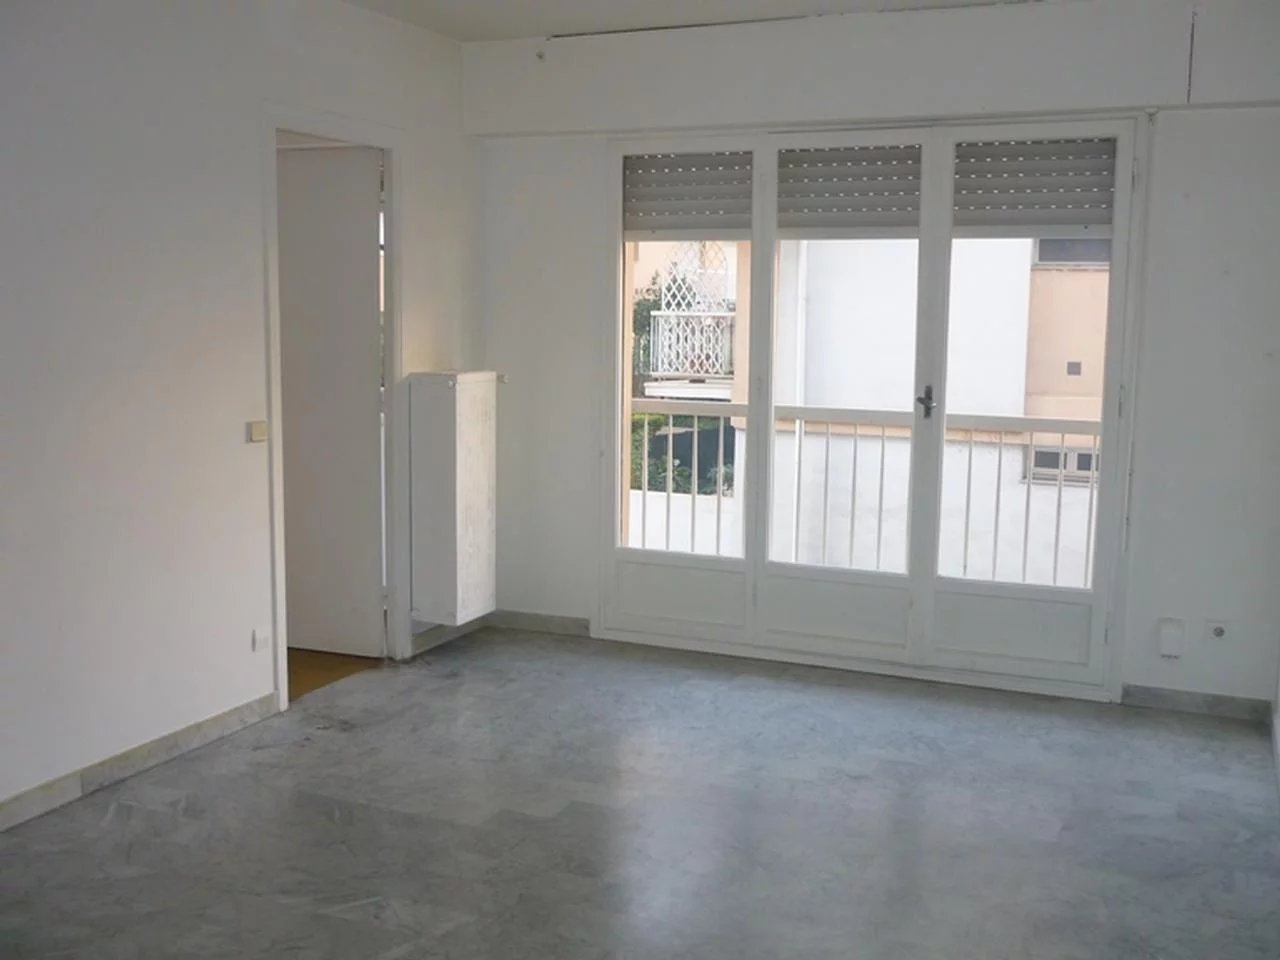 Appartement  1 Rooms 27.64m2  for sale   145 000 €